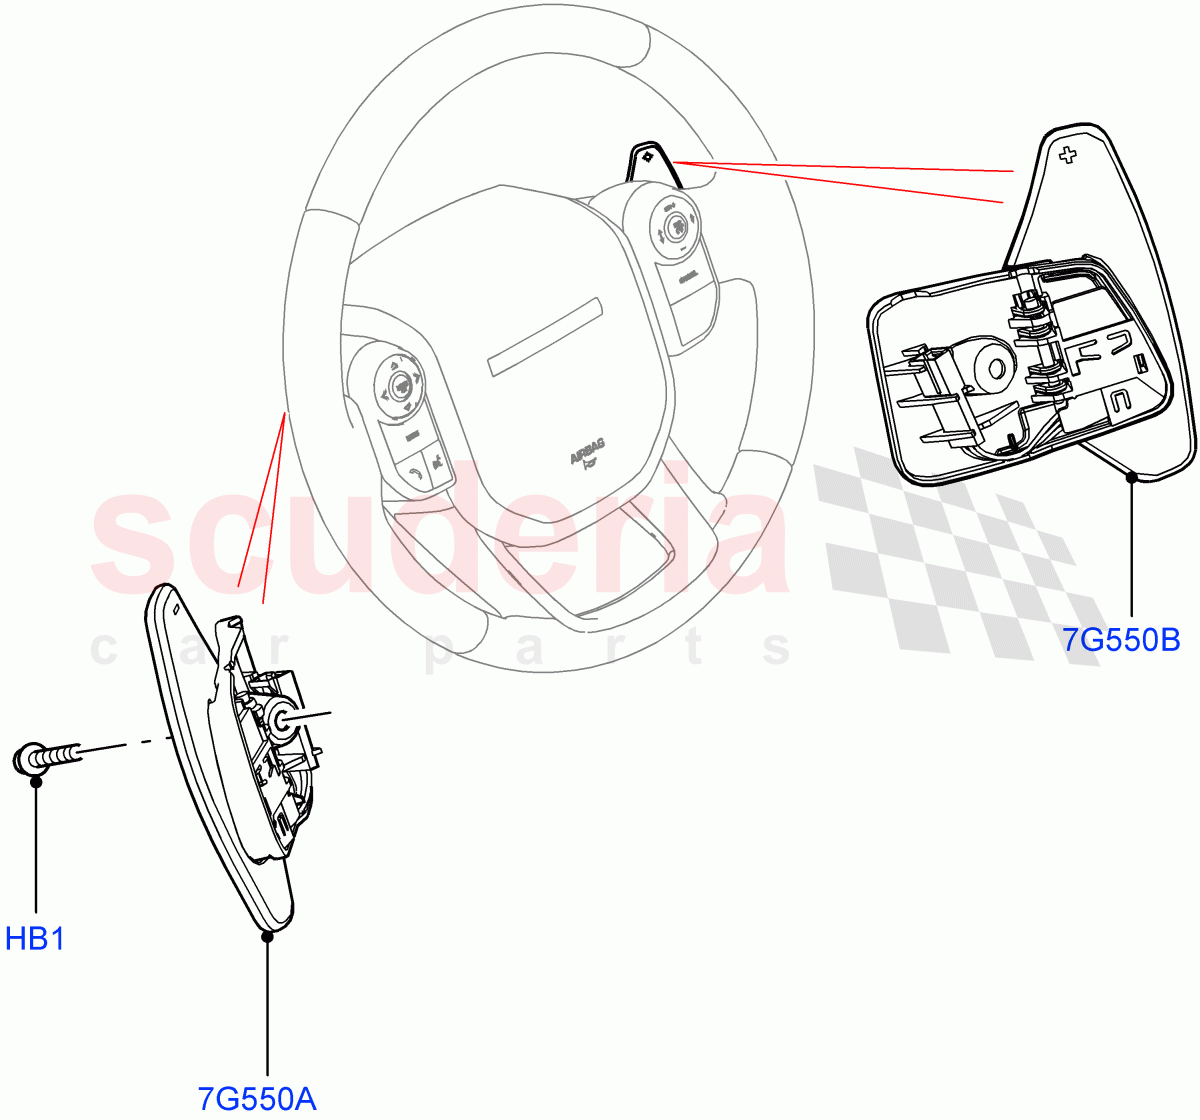 Gear Change-Automatic Transmission(Steering Wheel)(9 Speed Auto Trans 9HP50,Changsu (China),Paddle Shift,Paddle Shift - Noble)((V)FROMKG006088) of Land Rover Land Rover Range Rover Evoque (2019+) [2.0 Turbo Diesel AJ21D4]